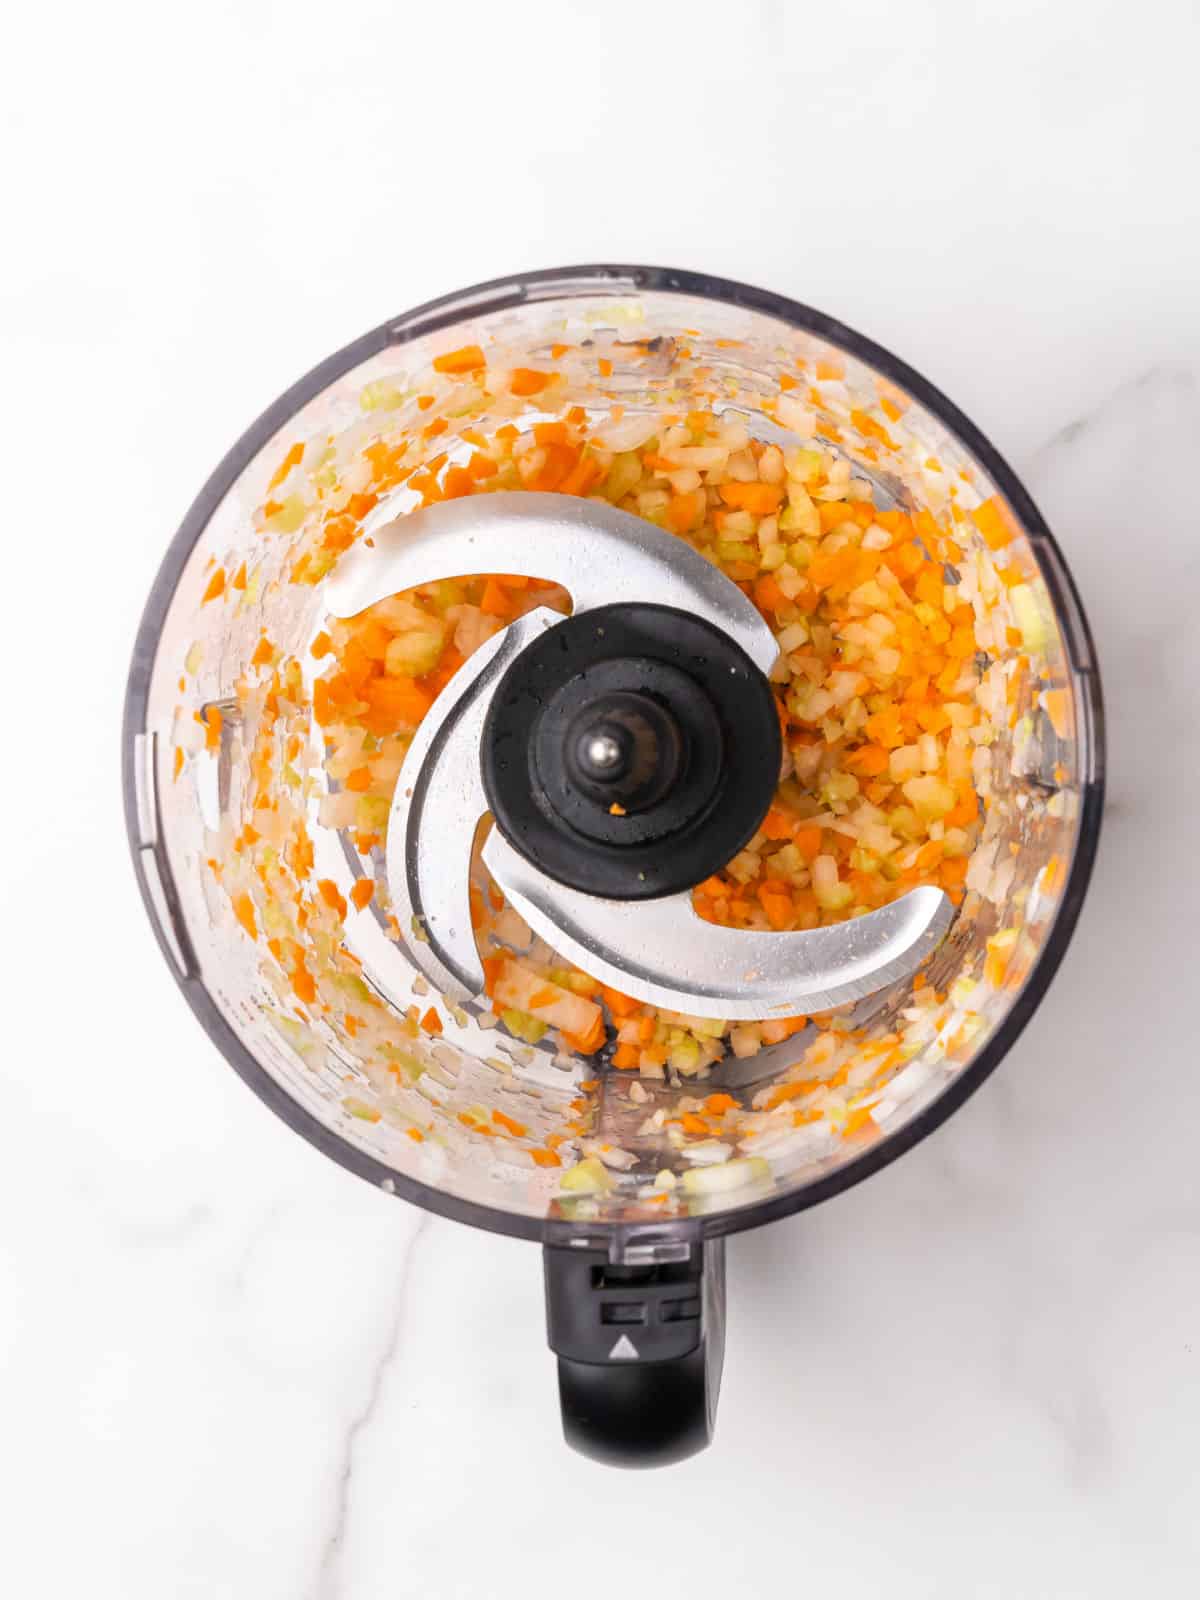 Top view of food processor bowl with chopped carrot, celery, and onion. White marble surface.